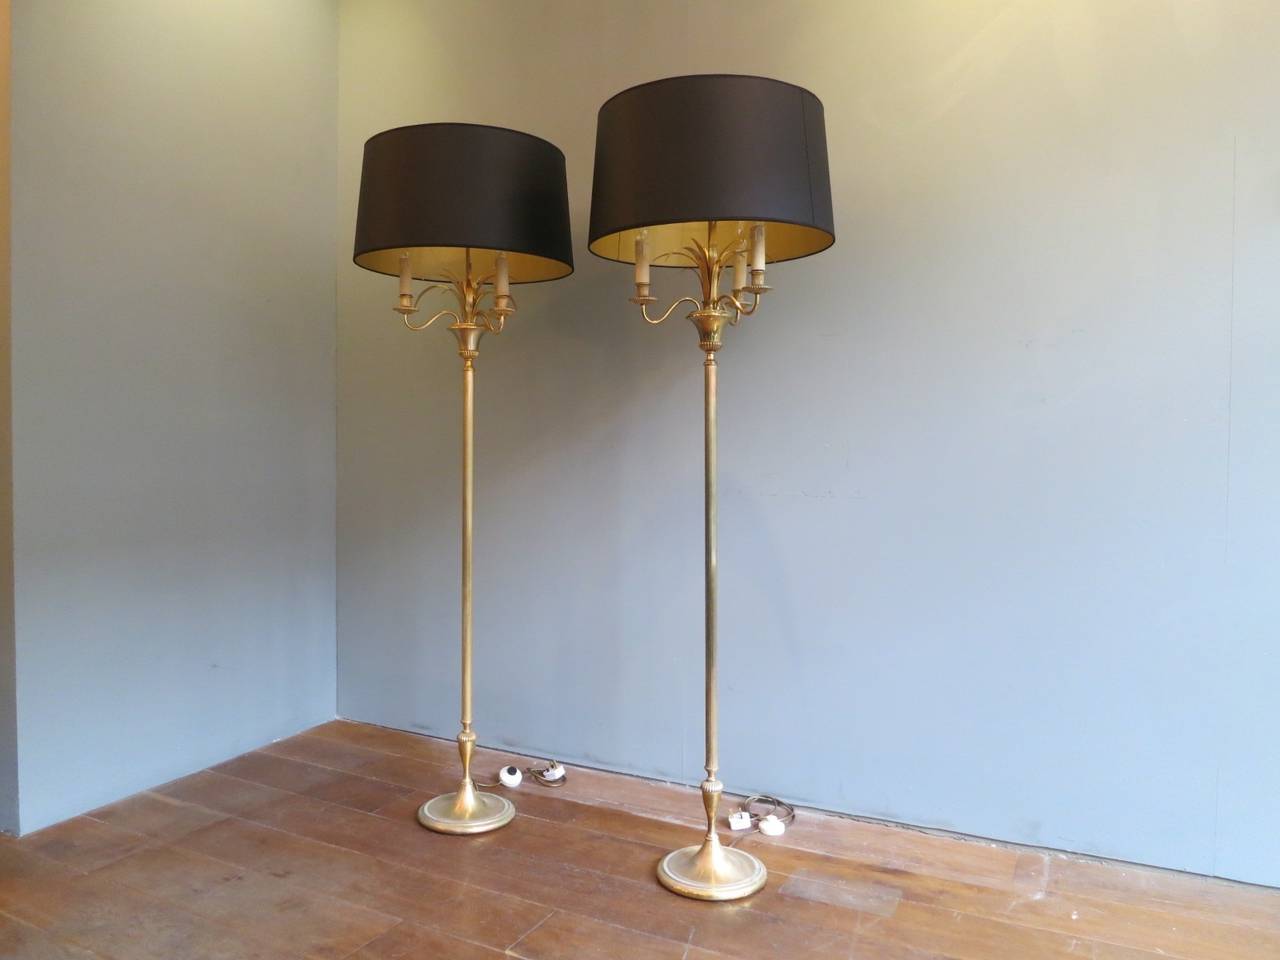 A pair of floor lamps in brass with bespoke made black shades with gold lining. Newly re wired. Very much in the manner of Maison Charles.